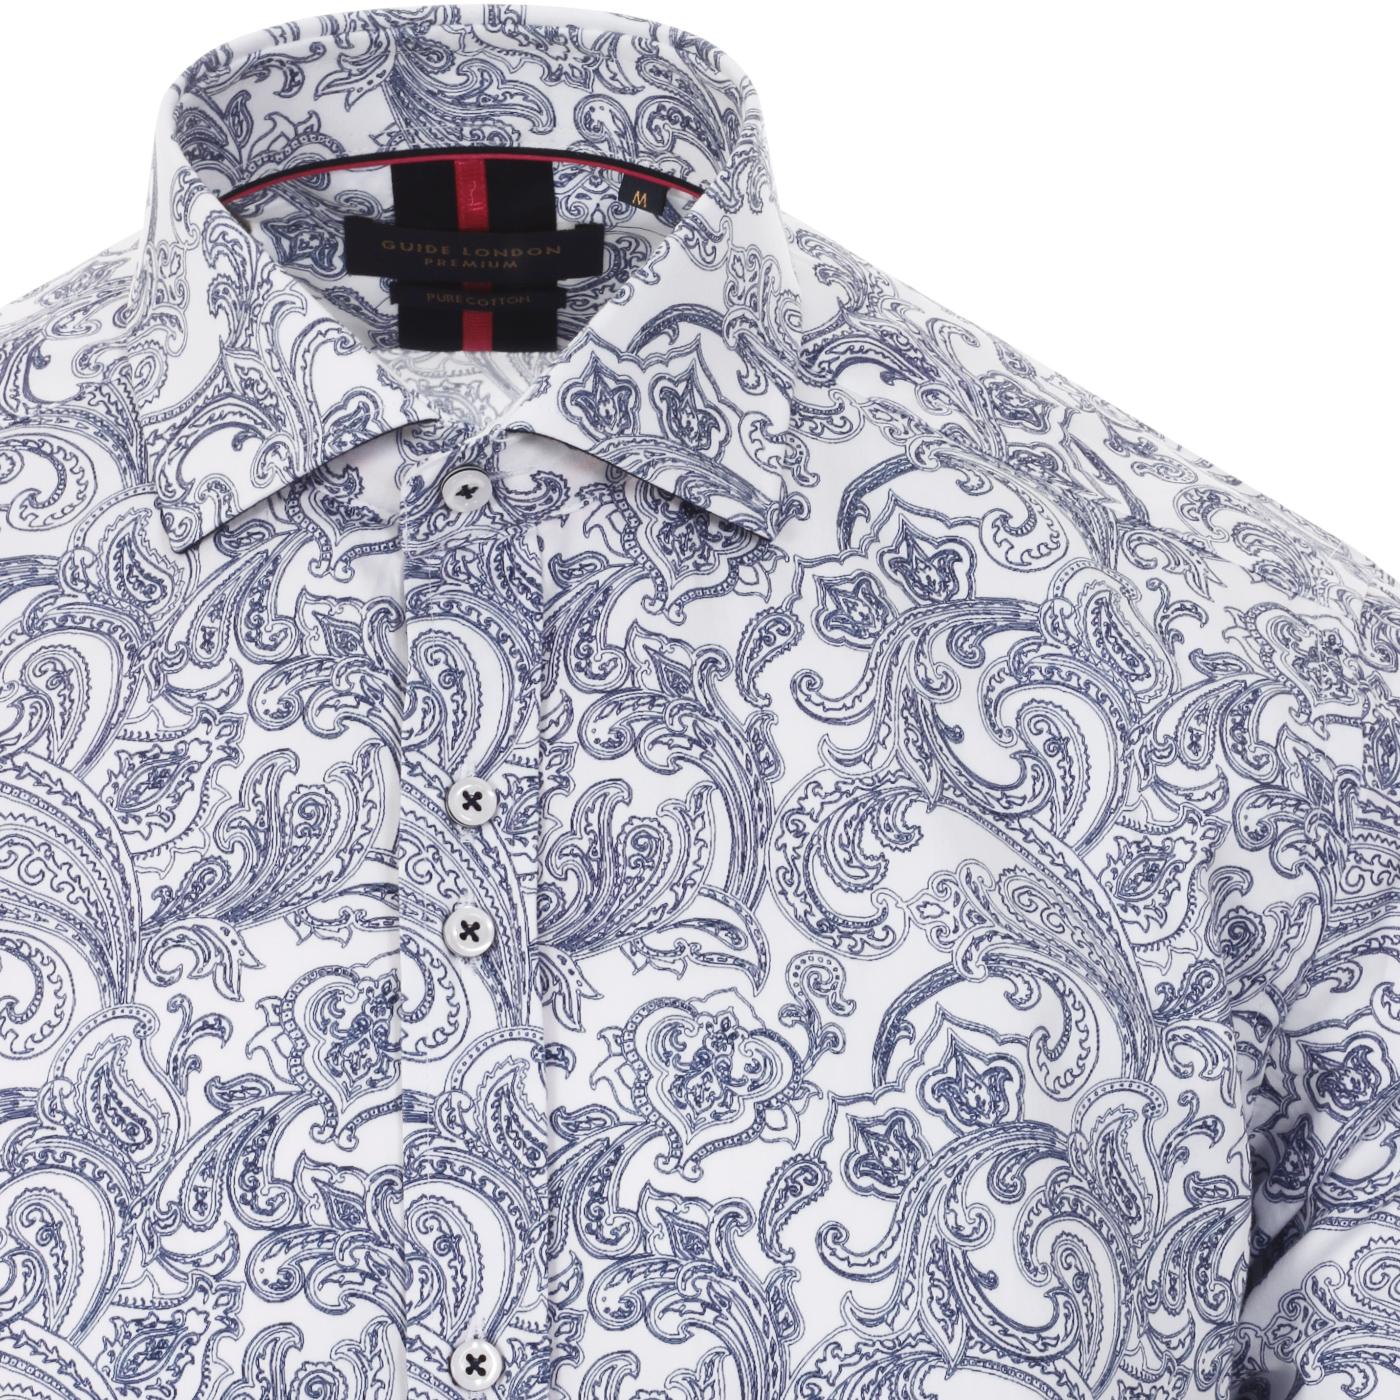 GUIDE LONDON Monotone Psychedelic Paisley Shirt in White